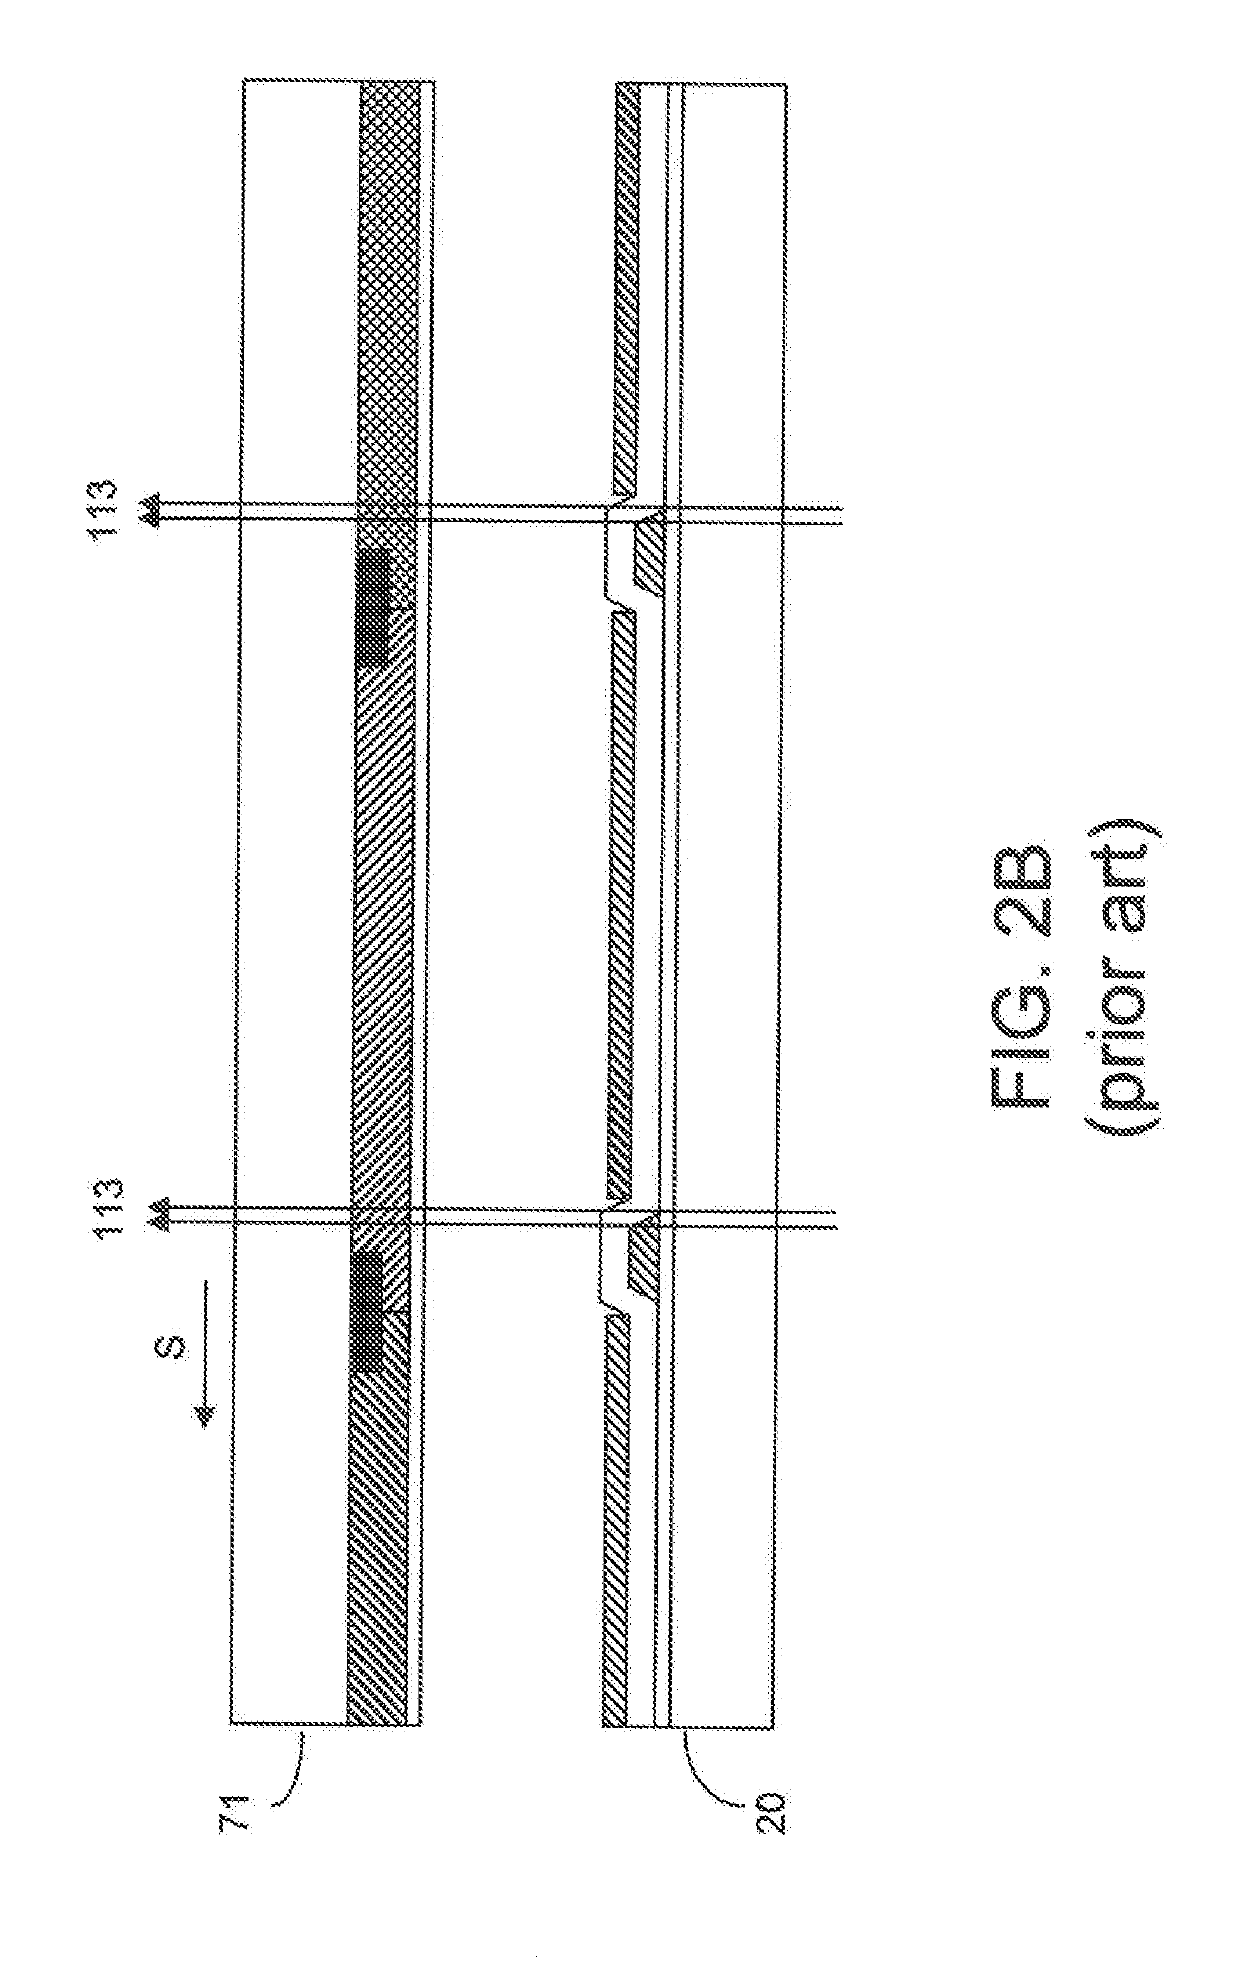 Curved LCD display device